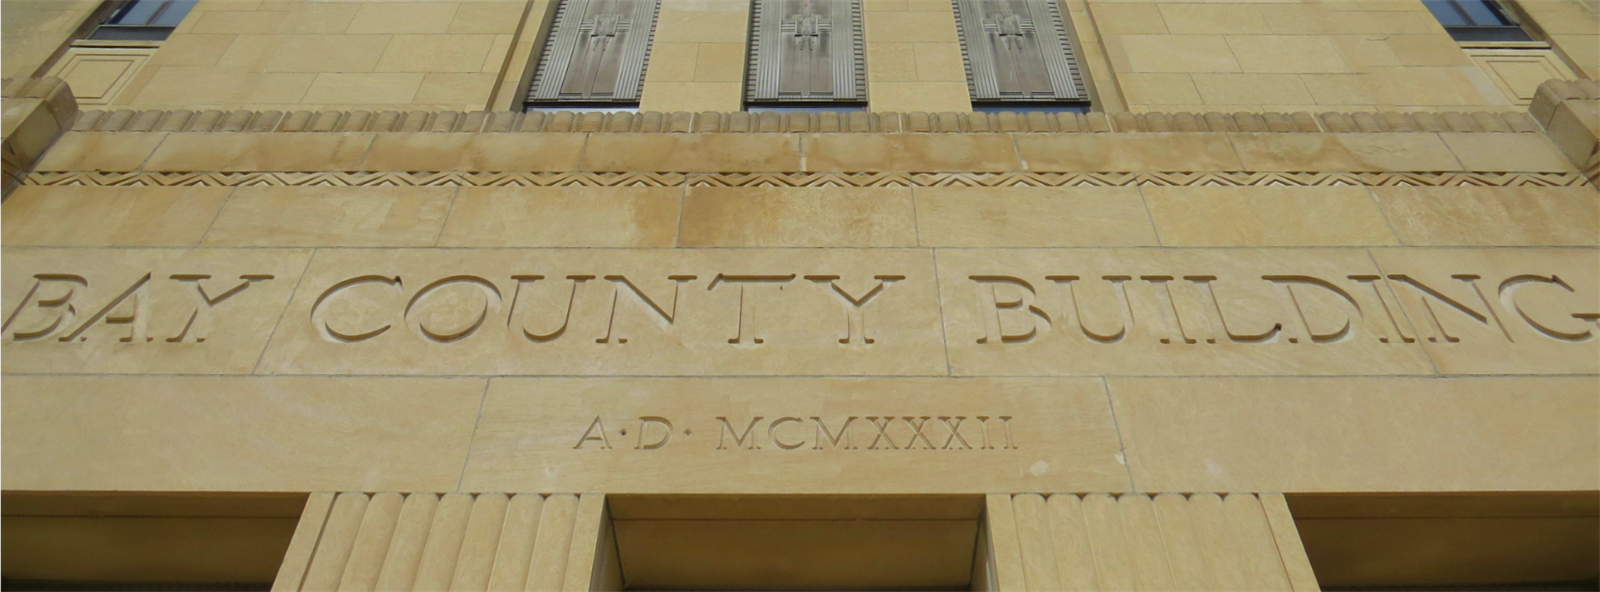 Front of Bay County Building